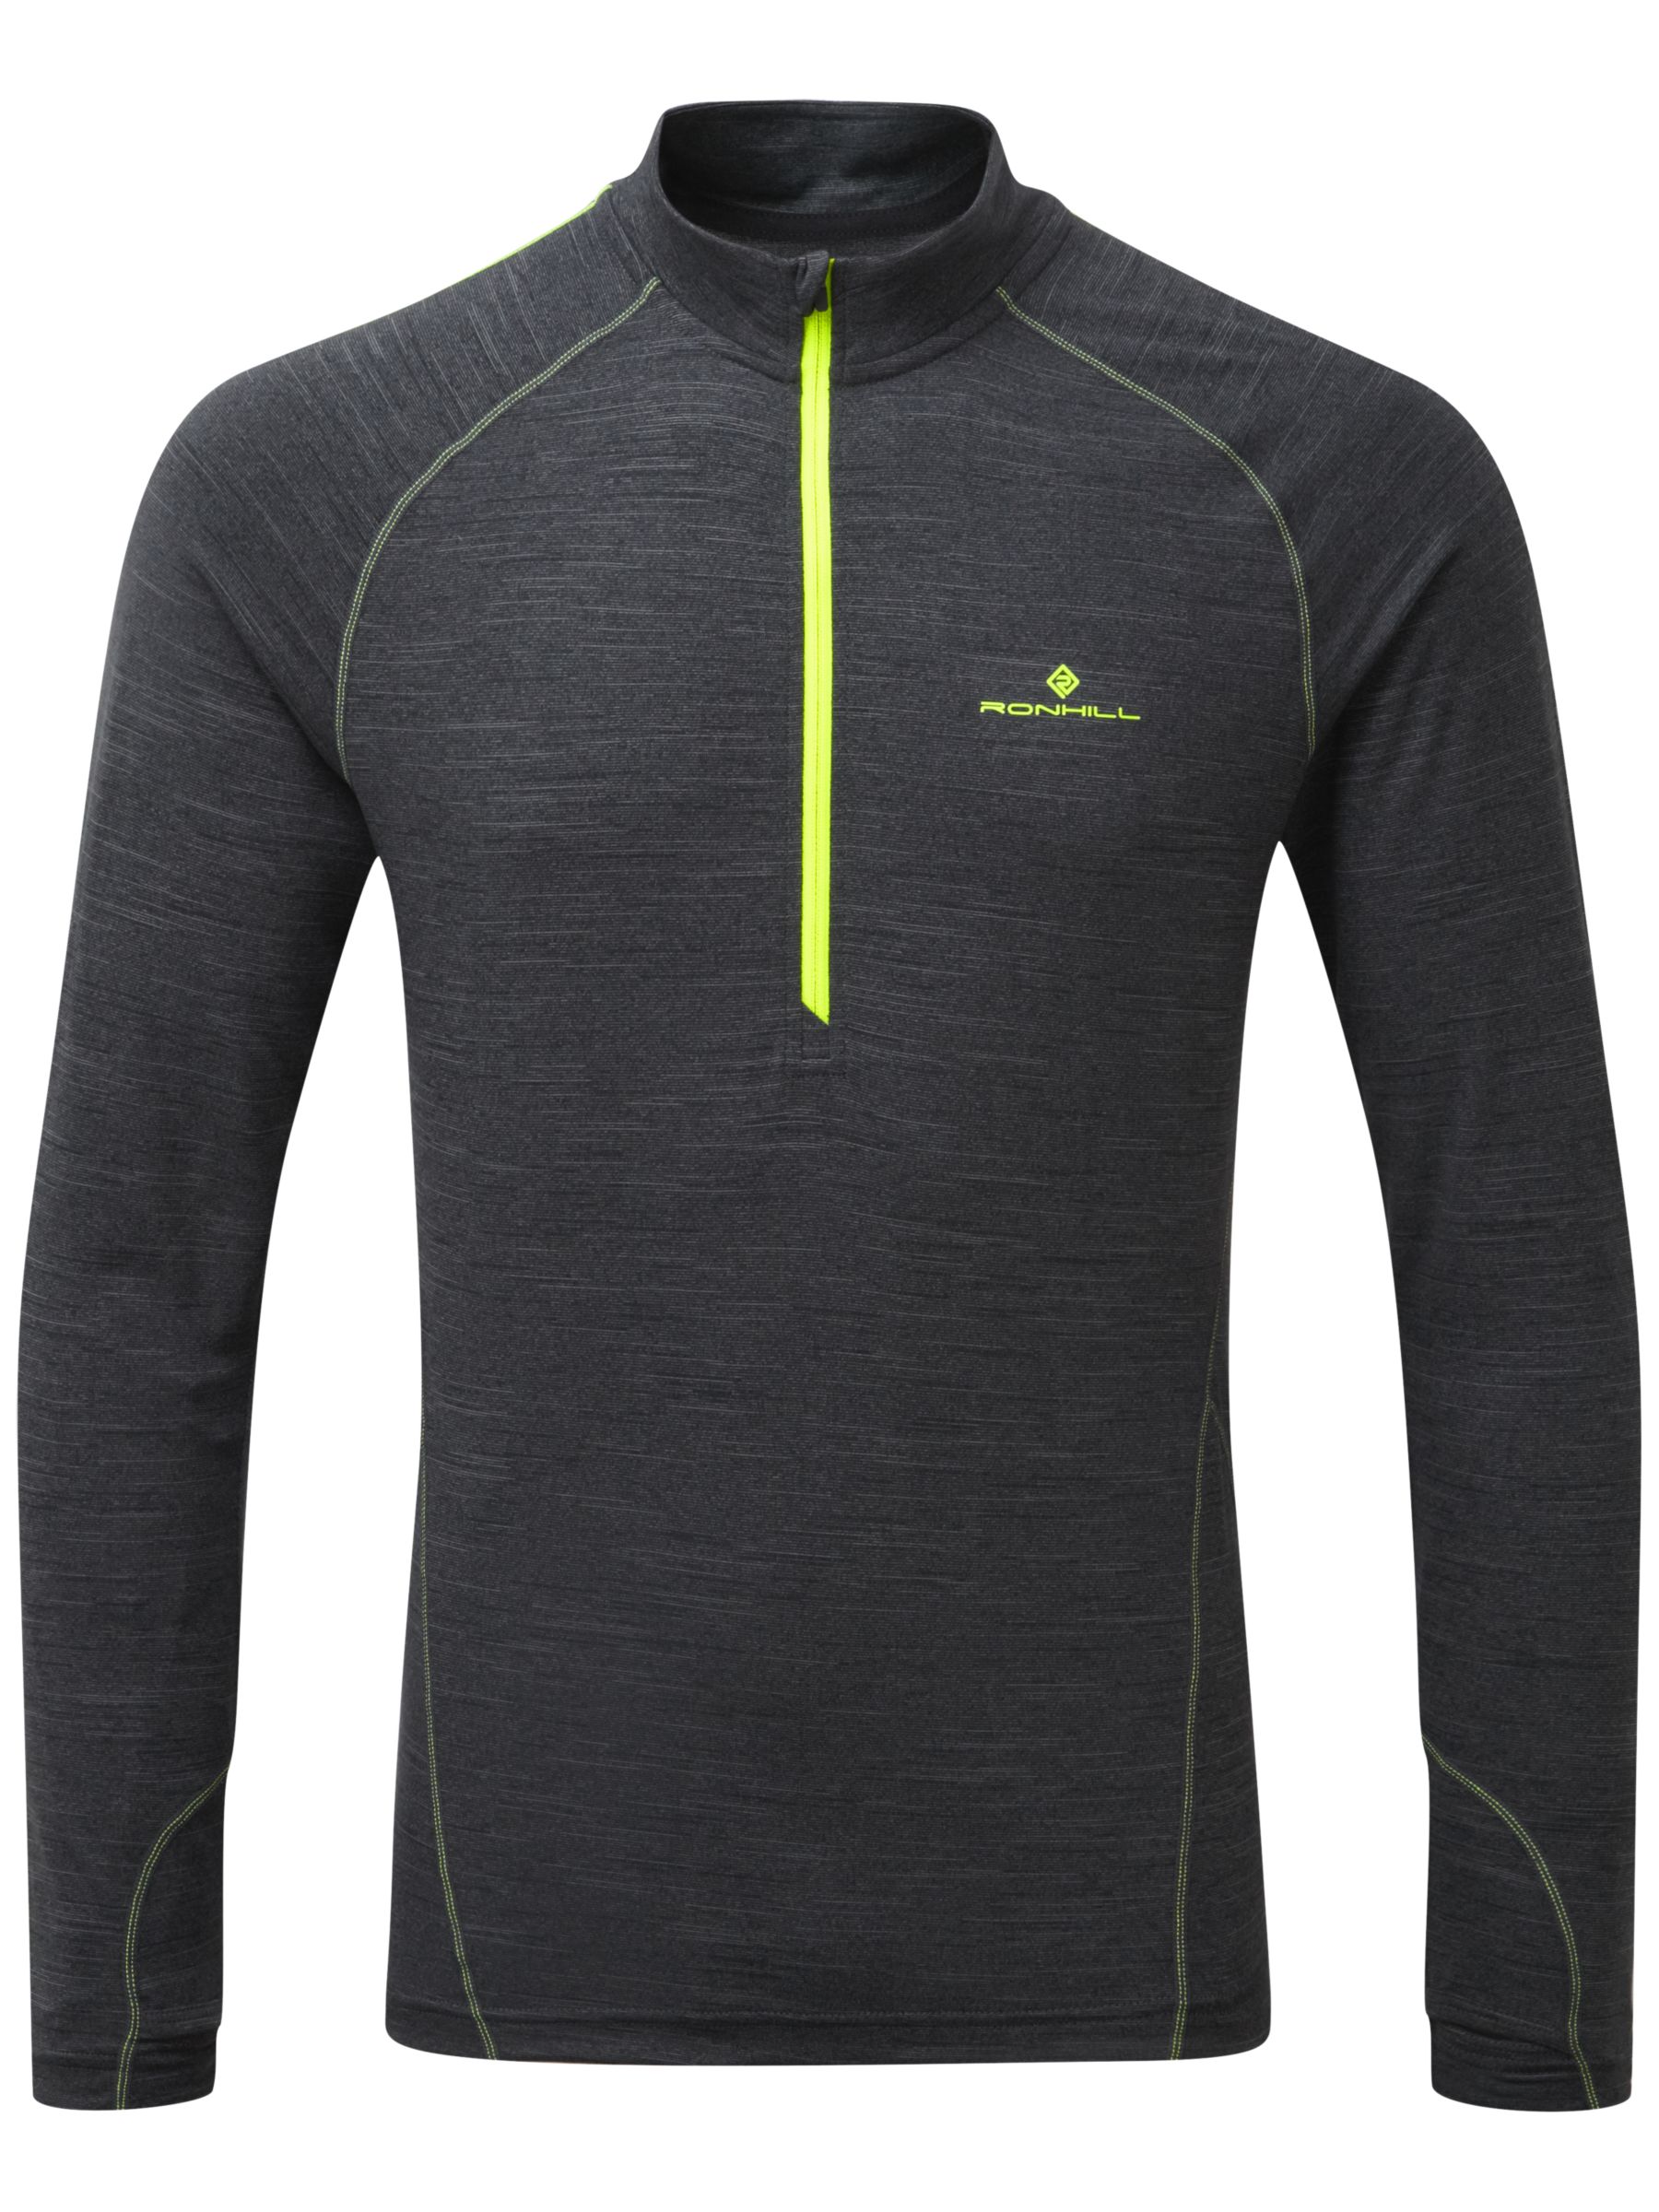 Ronhill Stride Thermal 1/2 Zip Long Sleeve Running Top, Charcoal at John Lewis & Partners